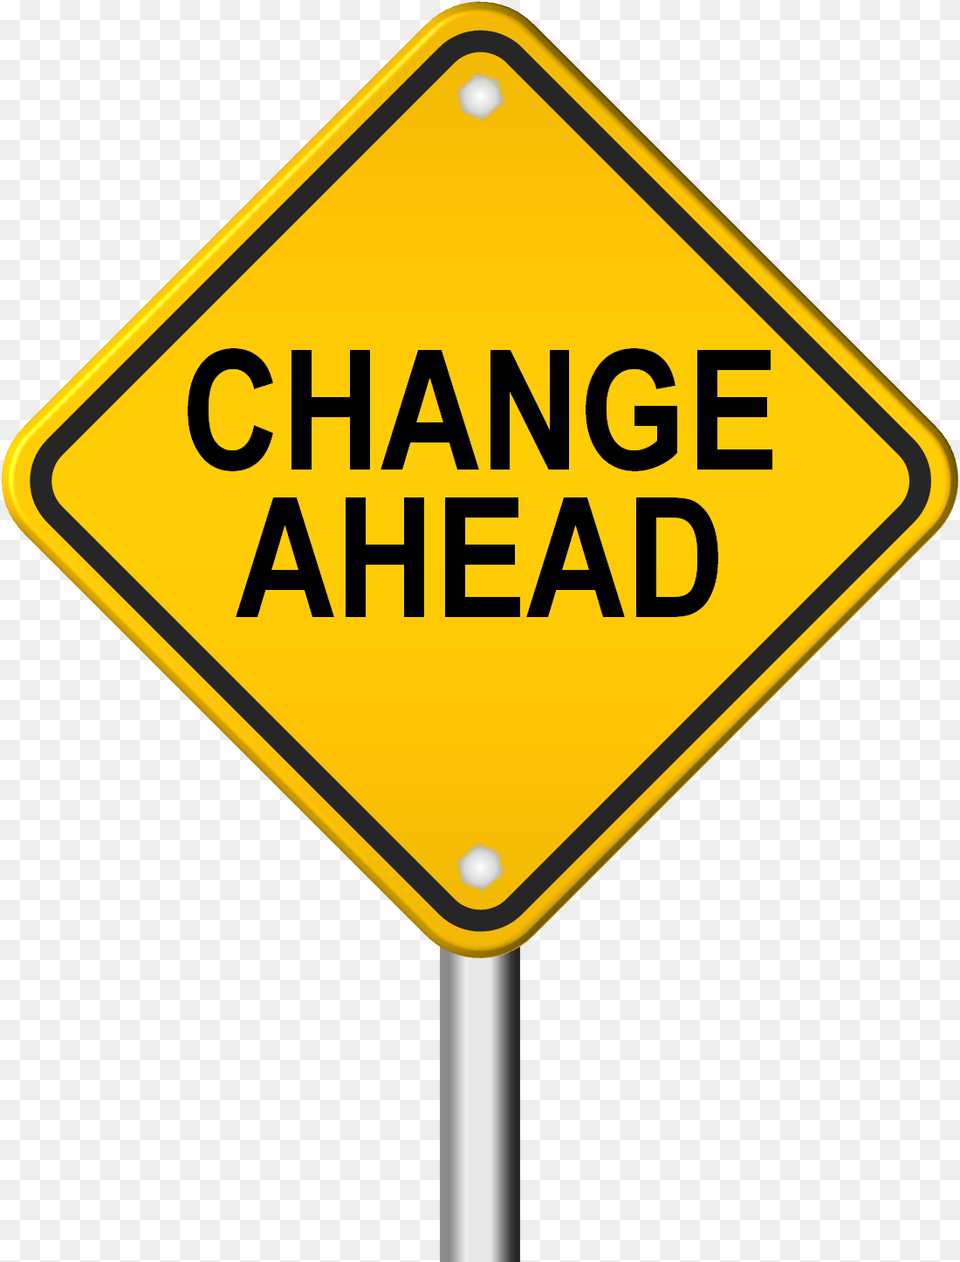 Wilhelm Investments Amp Realty Is Currently Launching Change Ahead, Sign, Symbol, Road Sign Png Image